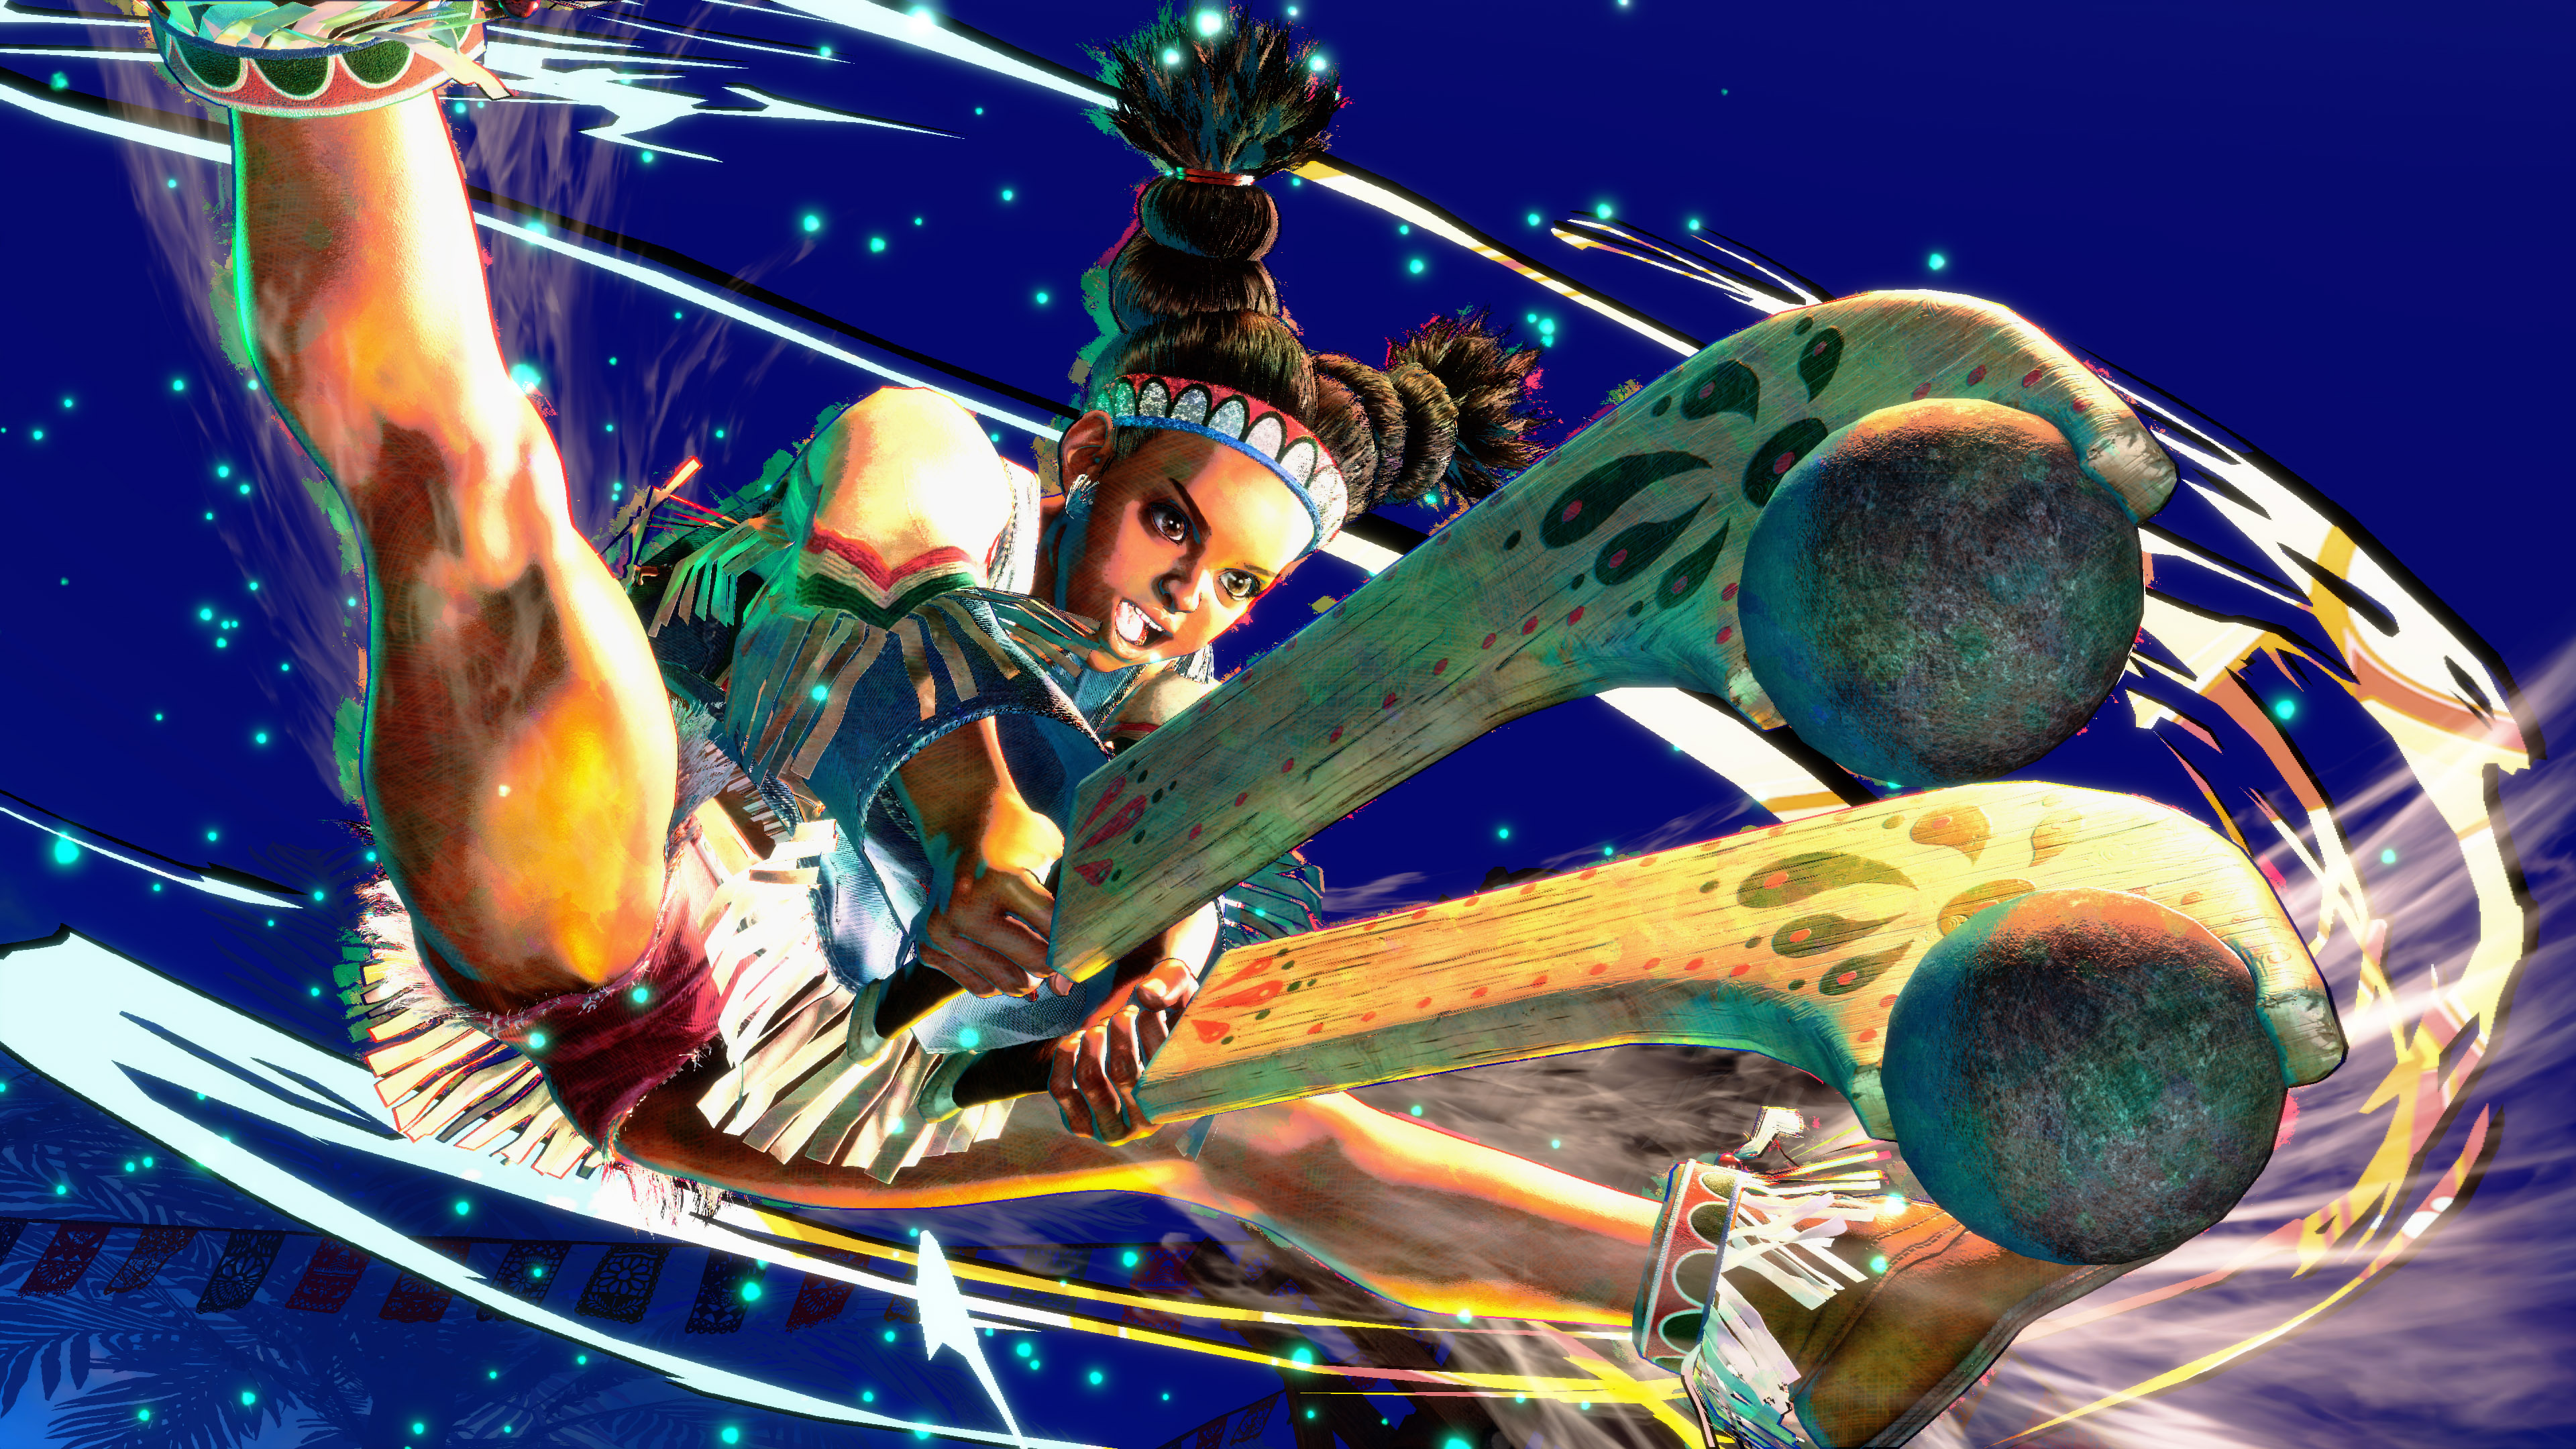 Street Fighter 6 adds Cammy, Zangief, and Lily as final launch fighters —  GAMINGTREND